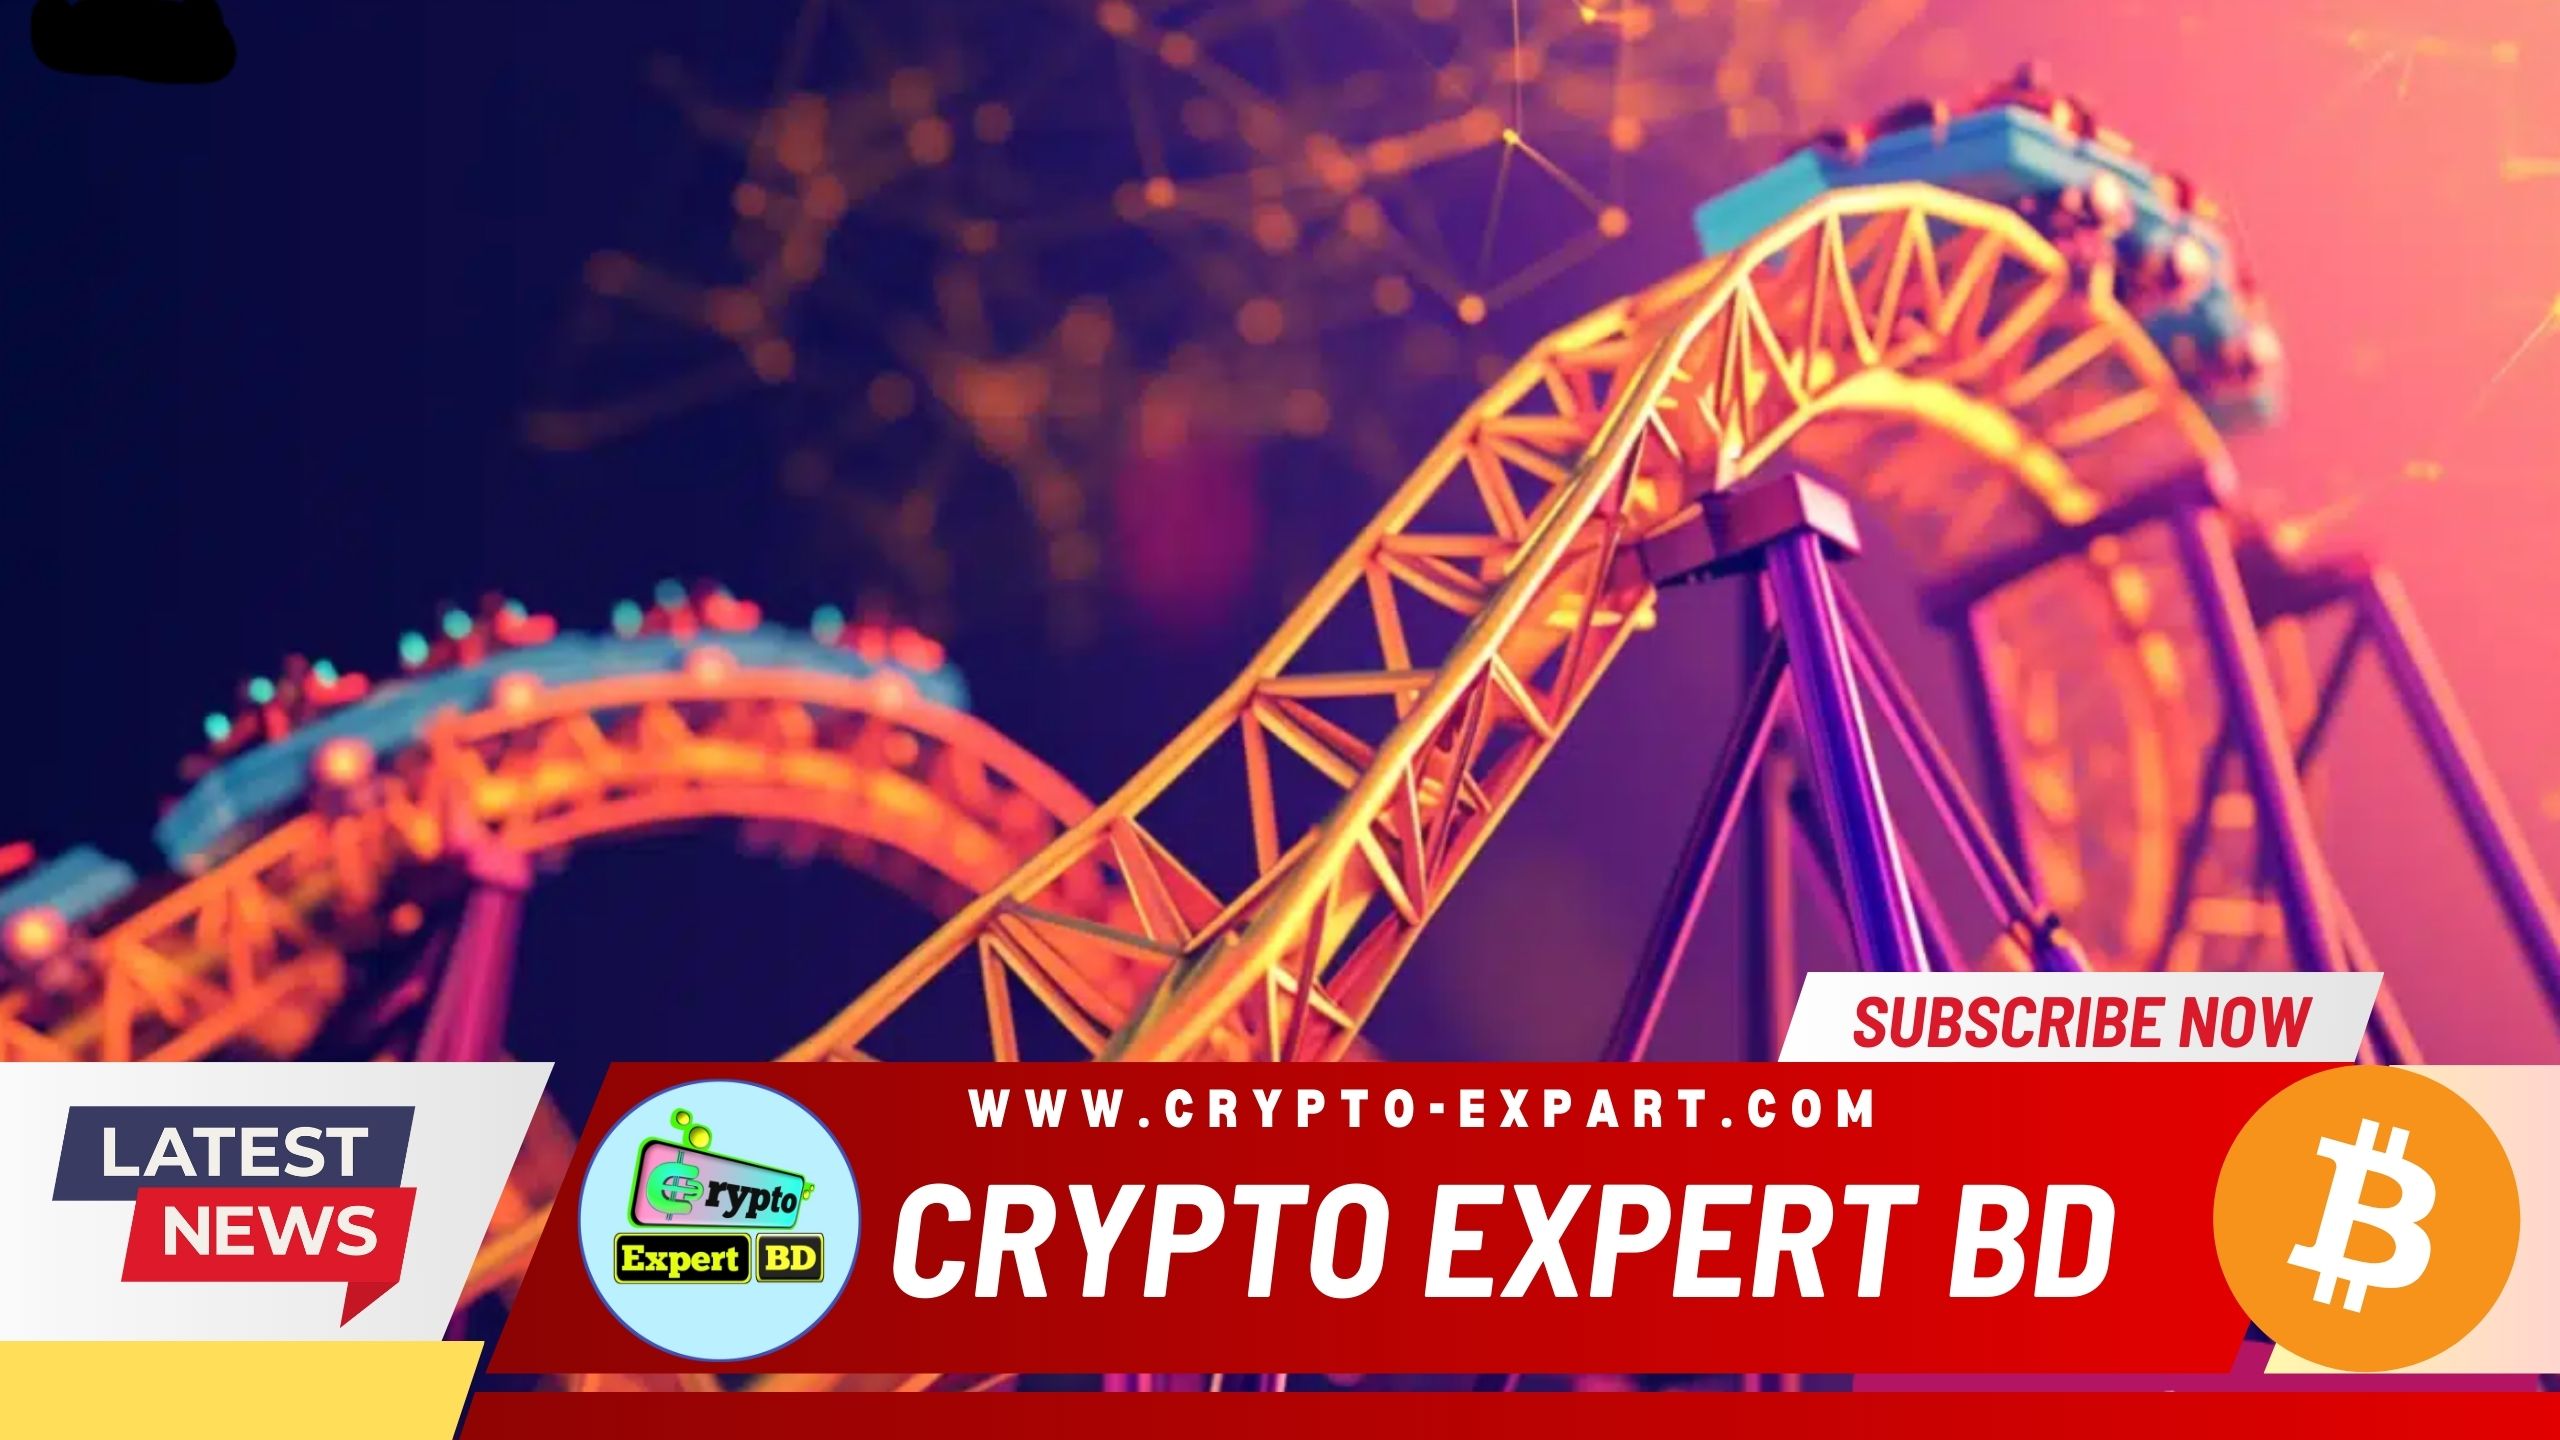 Crypto Market 2022-2023: A Rollercoaster Ride and the Path to Regulatory Clarity